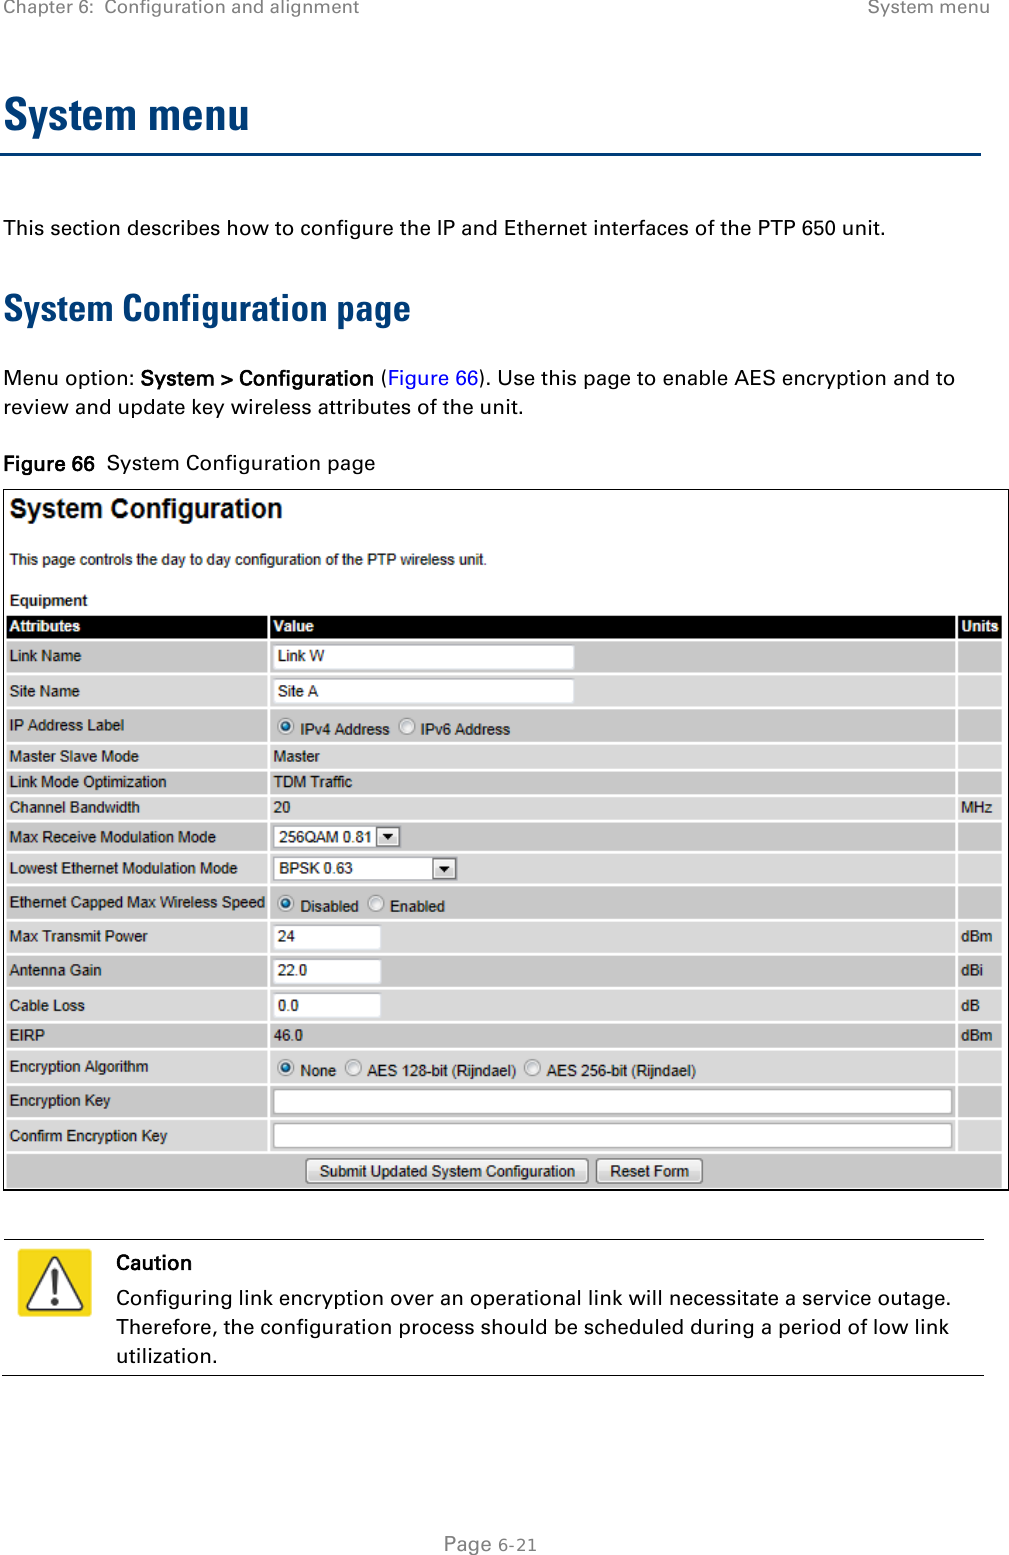 Chapter 6:  Configuration and alignment System menu  System menu This section describes how to configure the IP and Ethernet interfaces of the PTP 650 unit. System Configuration page Menu option: System &gt; Configuration (Figure 66). Use this page to enable AES encryption and to review and update key wireless attributes of the unit. Figure 66  System Configuration page    Caution Configuring link encryption over an operational link will necessitate a service outage. Therefore, the configuration process should be scheduled during a period of low link utilization.   Page 6-21 